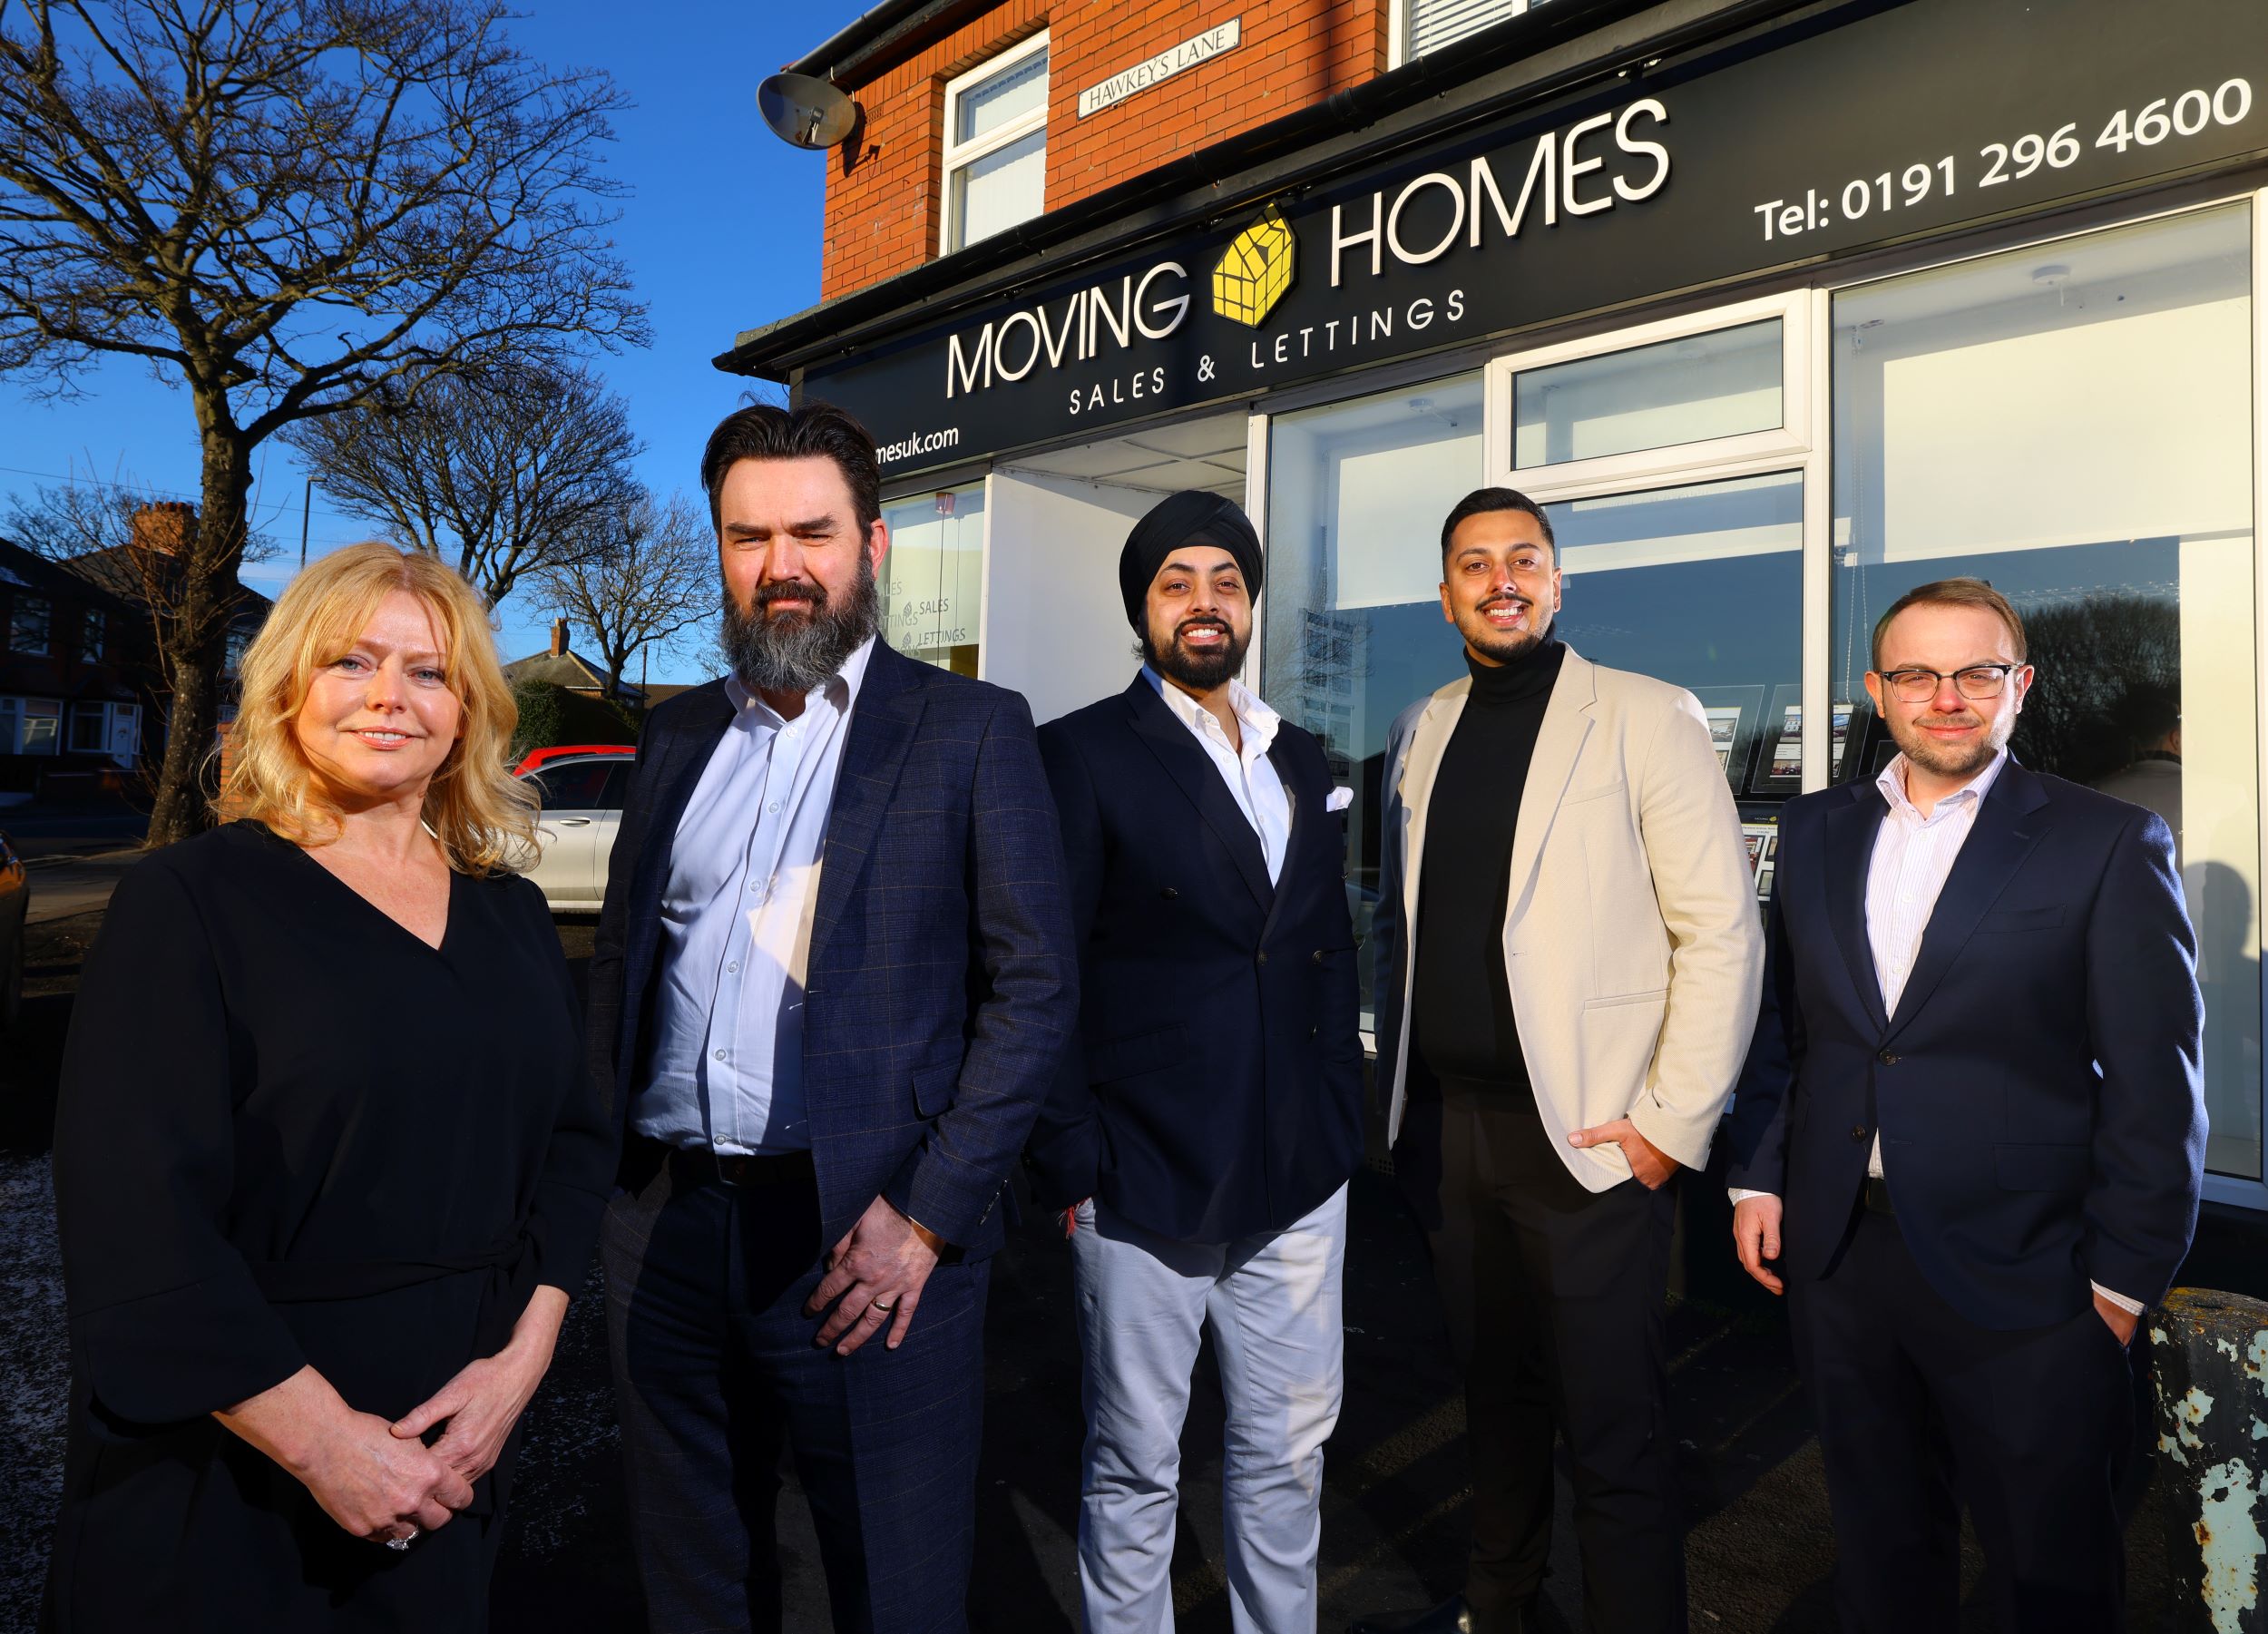 (from left) Moving Homes' founder Tracey Culverhouse, Michael Cantwell of RMT Accountants & Business Advisors, Aman Singh and Inde Dhillon of Northwood Newcastle and Daniel Bell of Mincoffs Solicitors